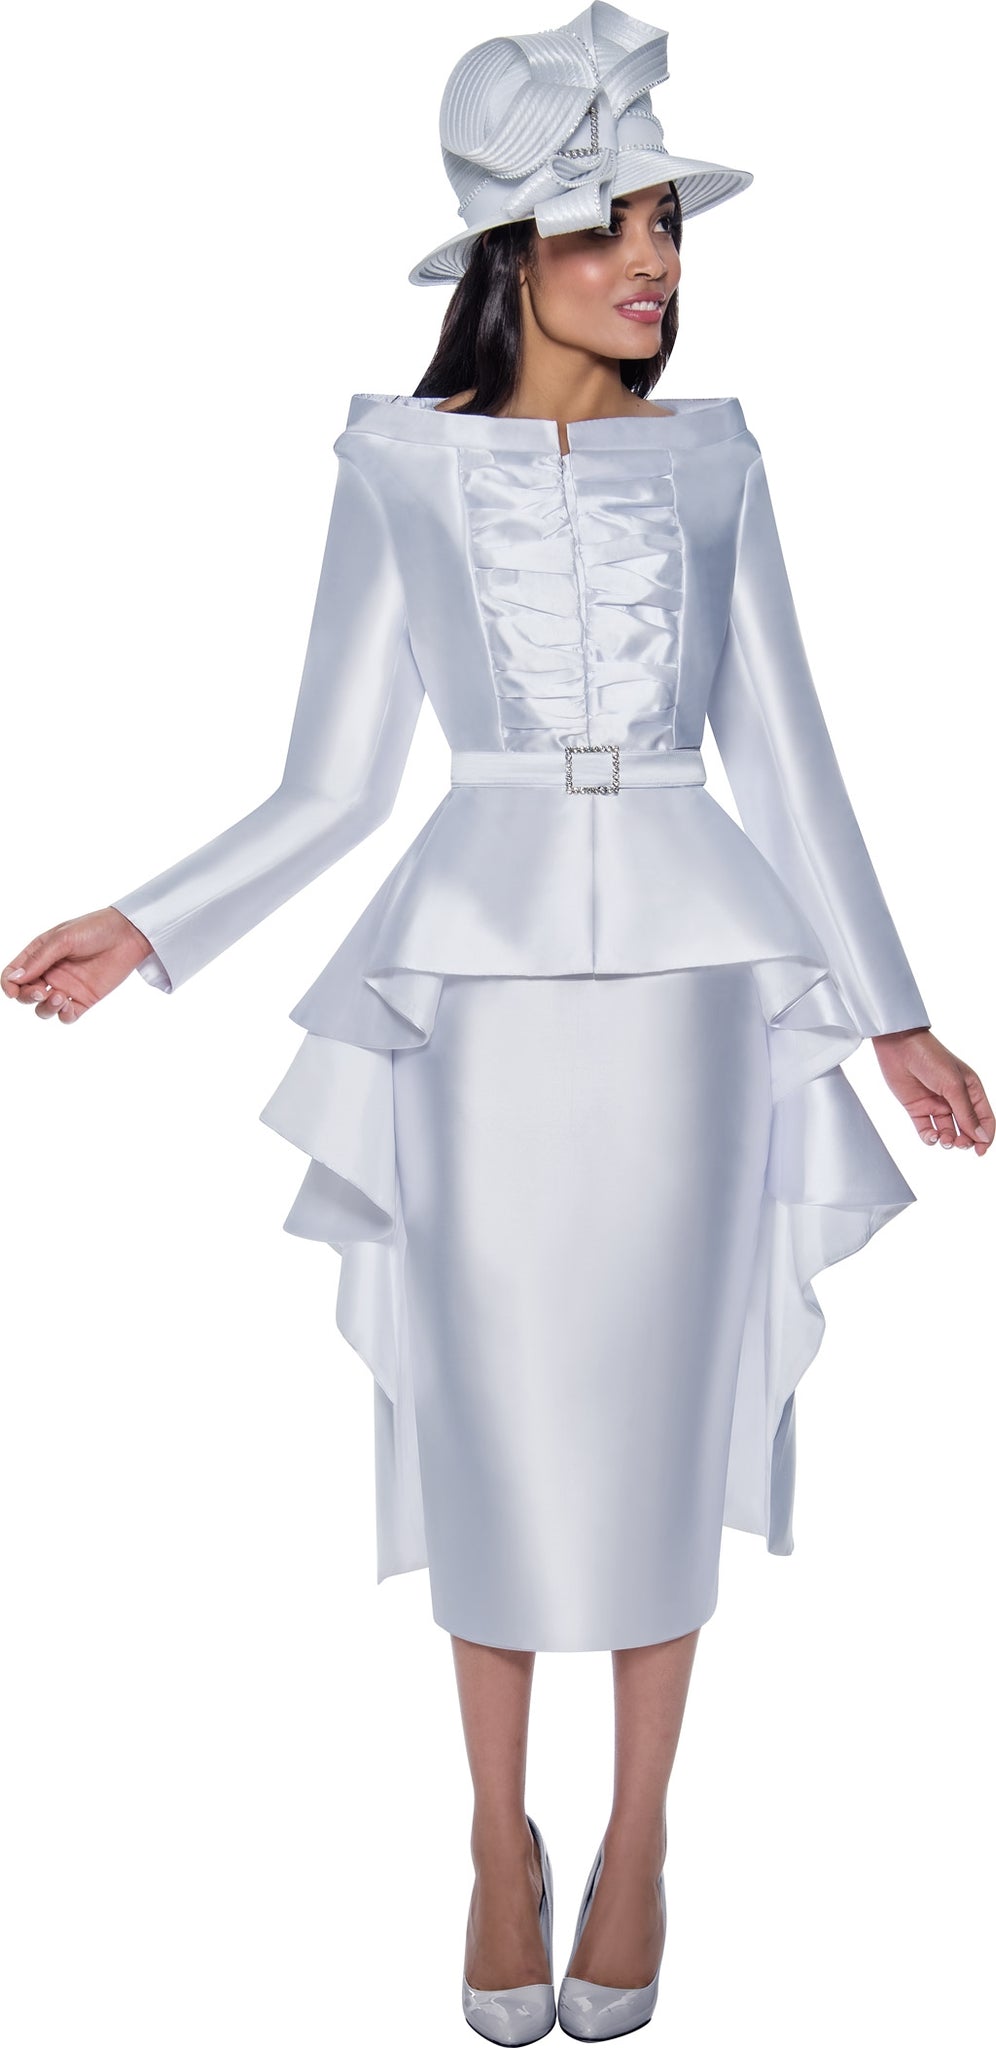 GMI Church Suit 9632-White - Church Suits For Less